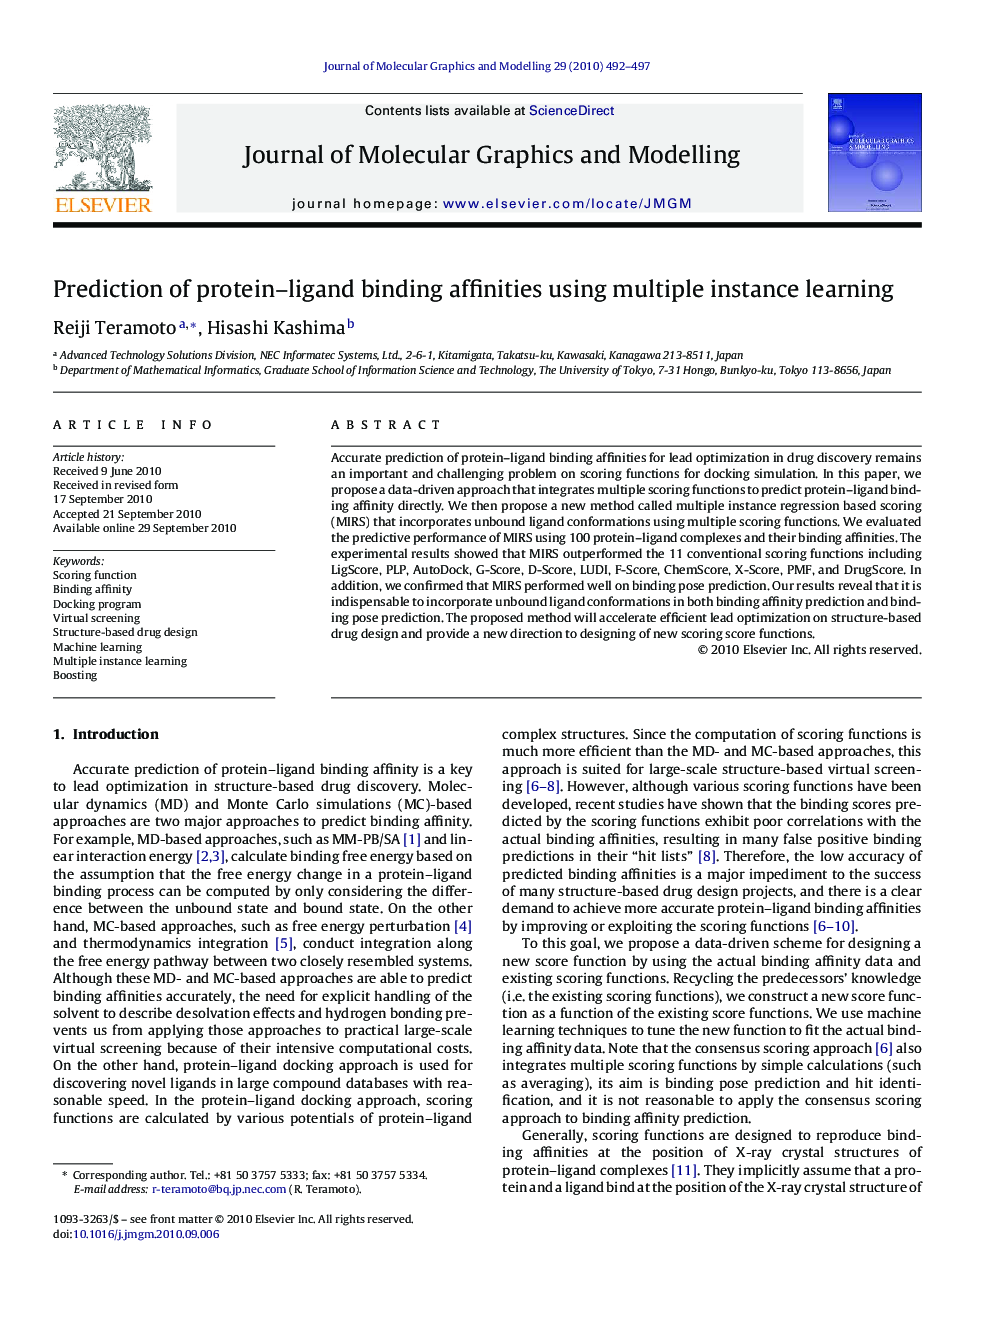 Prediction of protein–ligand binding affinities using multiple instance learning